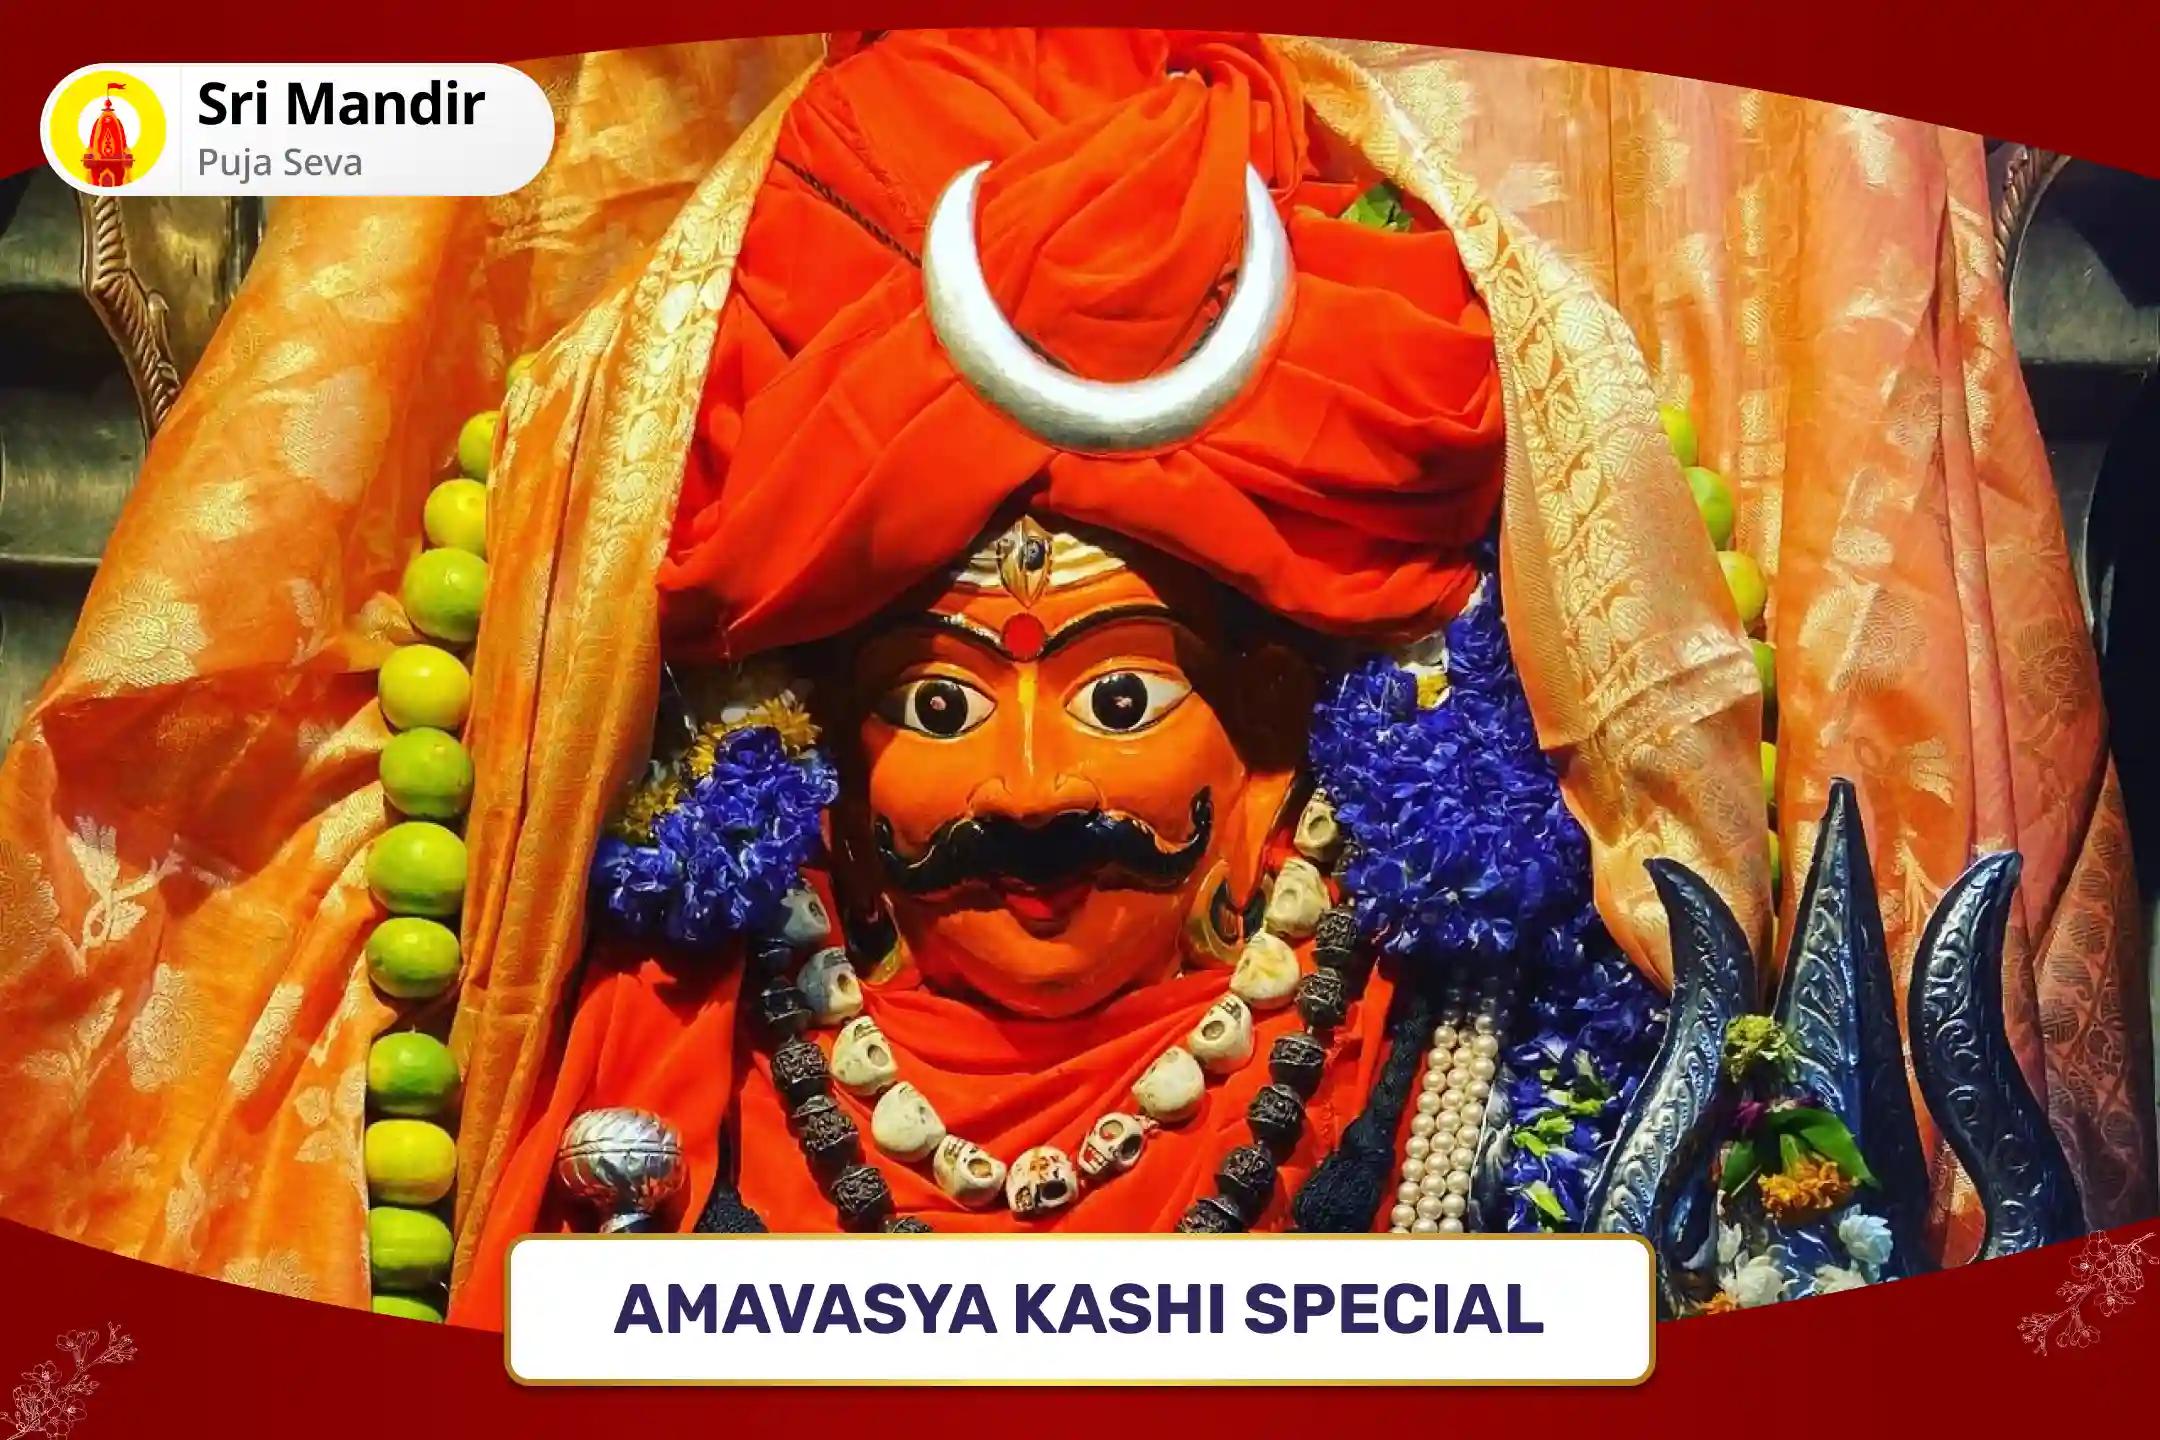 Amavasya Kashi Special Kaal Bhairav Stotra Path and Adikaal Bhairav Tantra Yukta Havan For protection from Negative Energies, Evil Forces and Adversities in Life